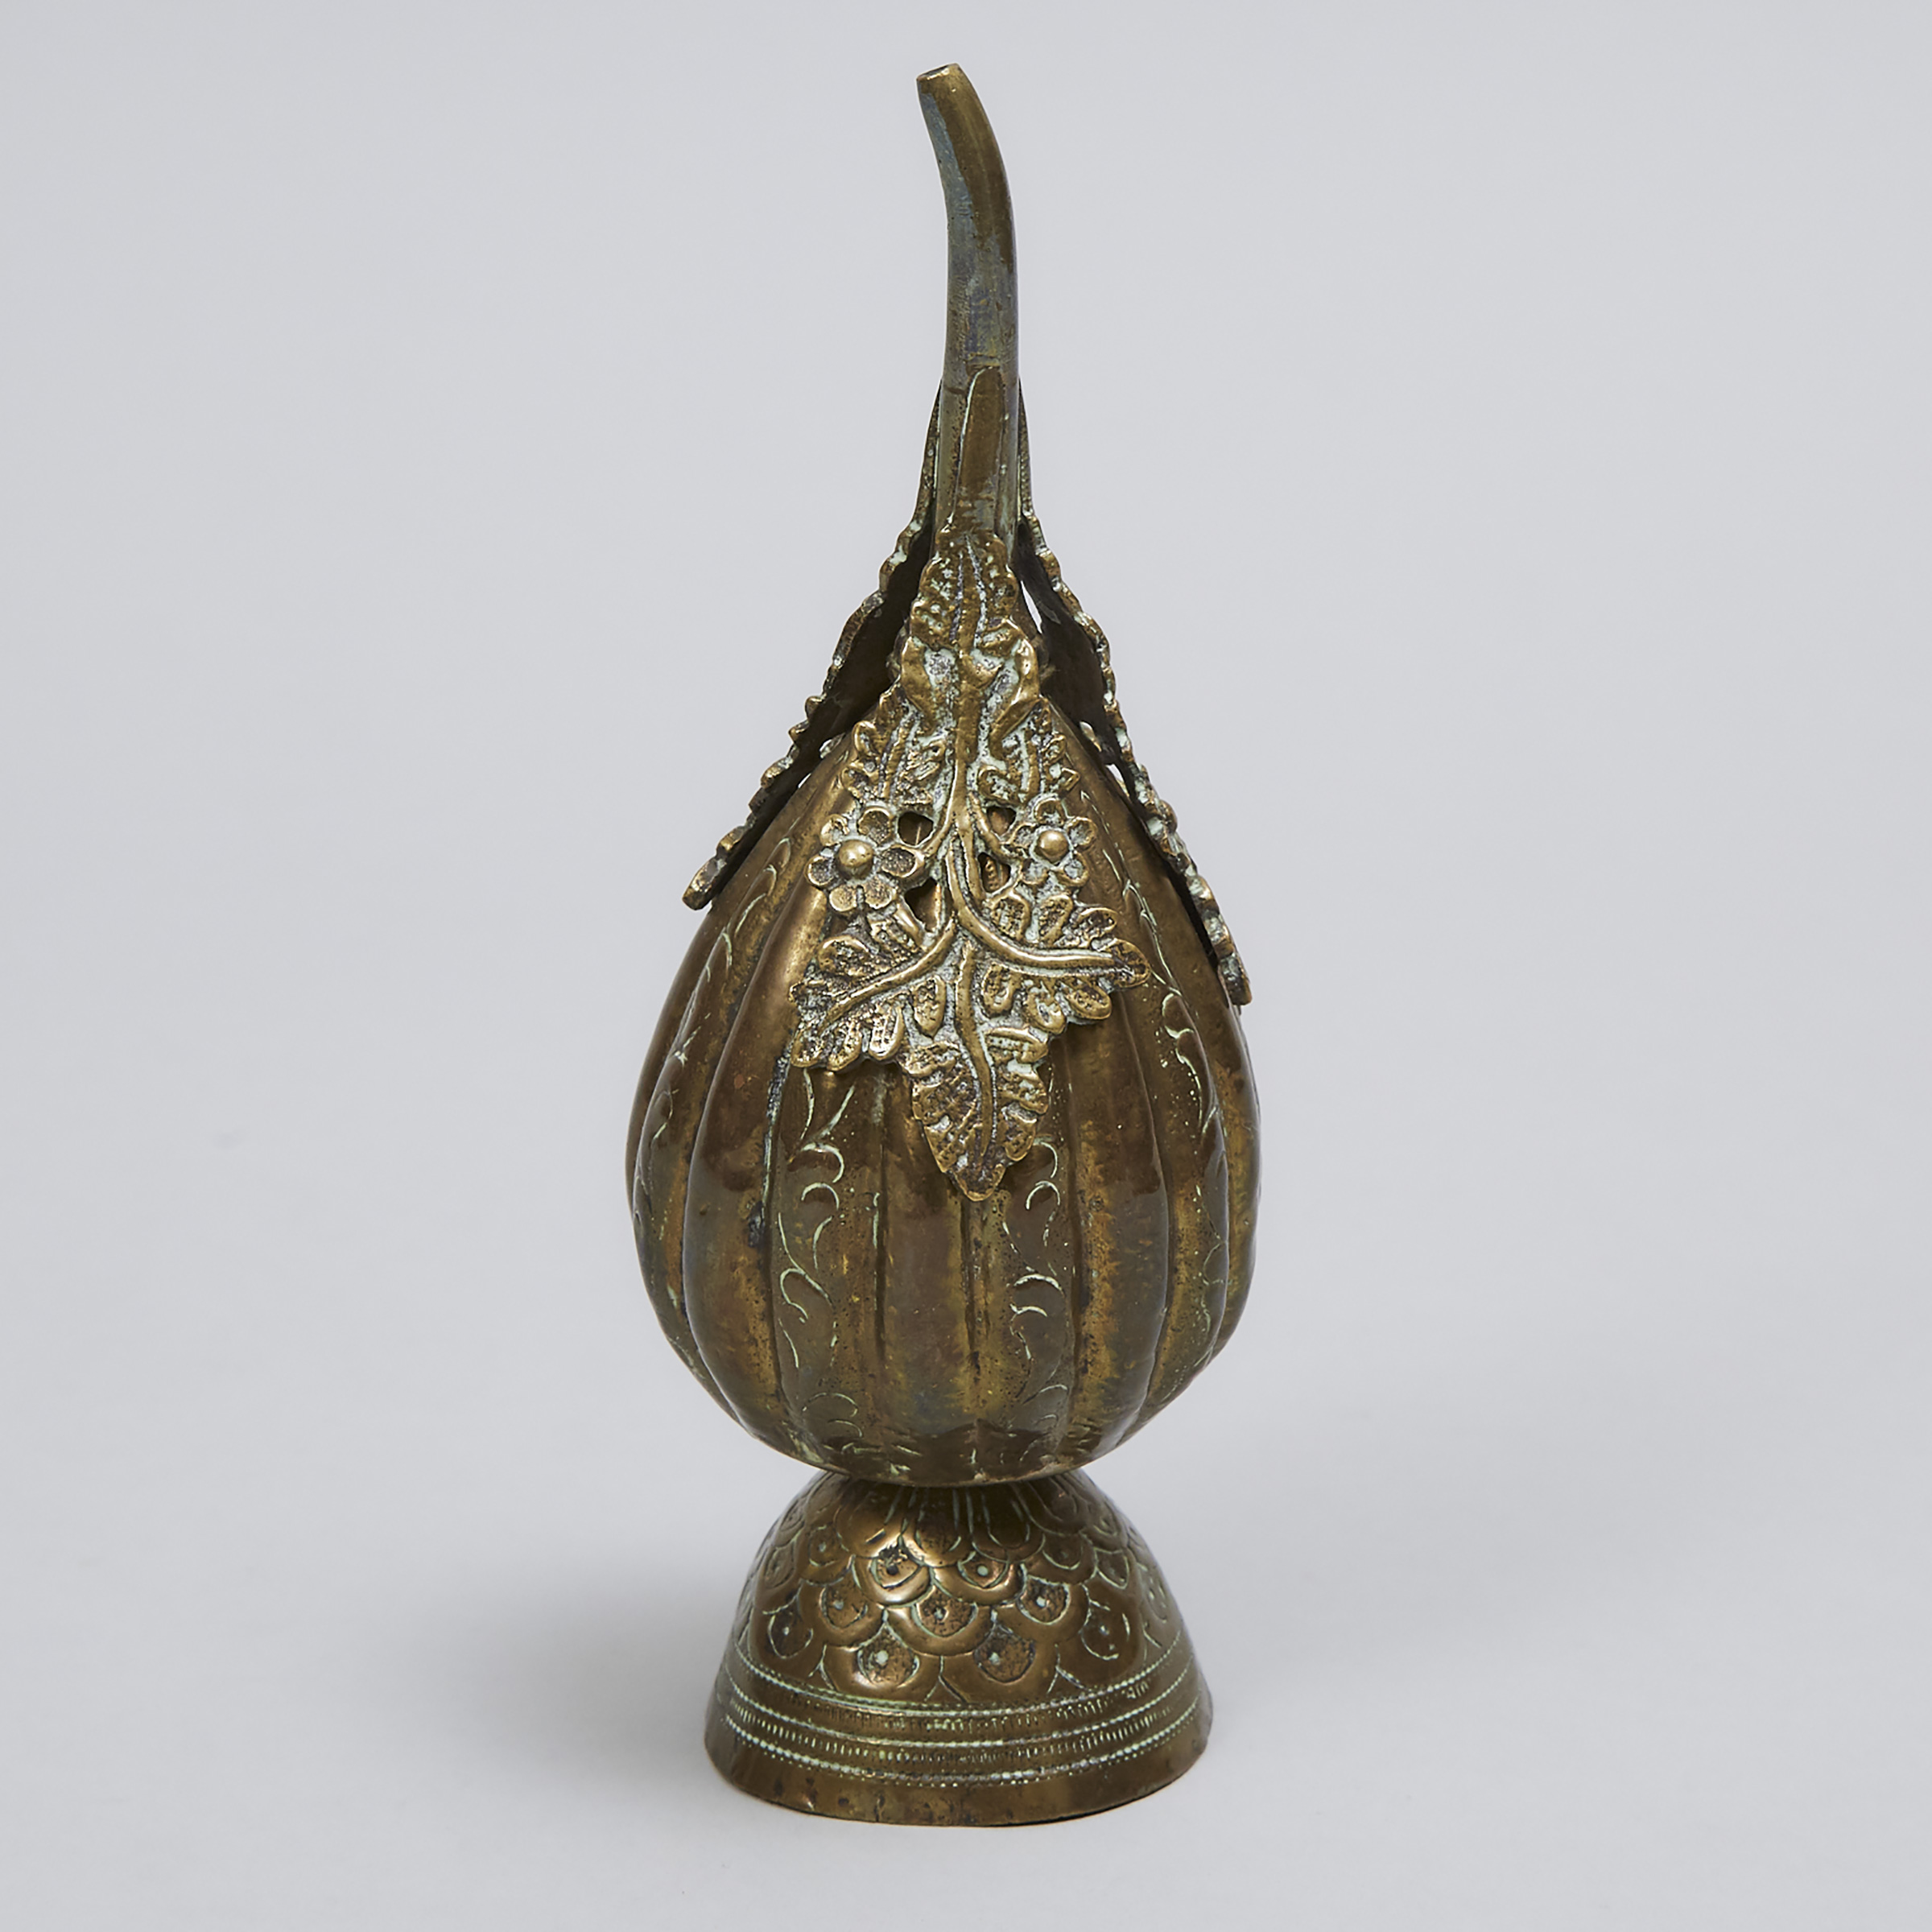 Turkish Ottoman Tombak Melon Form Rosewater Sprinkler, 18th/early 19th century